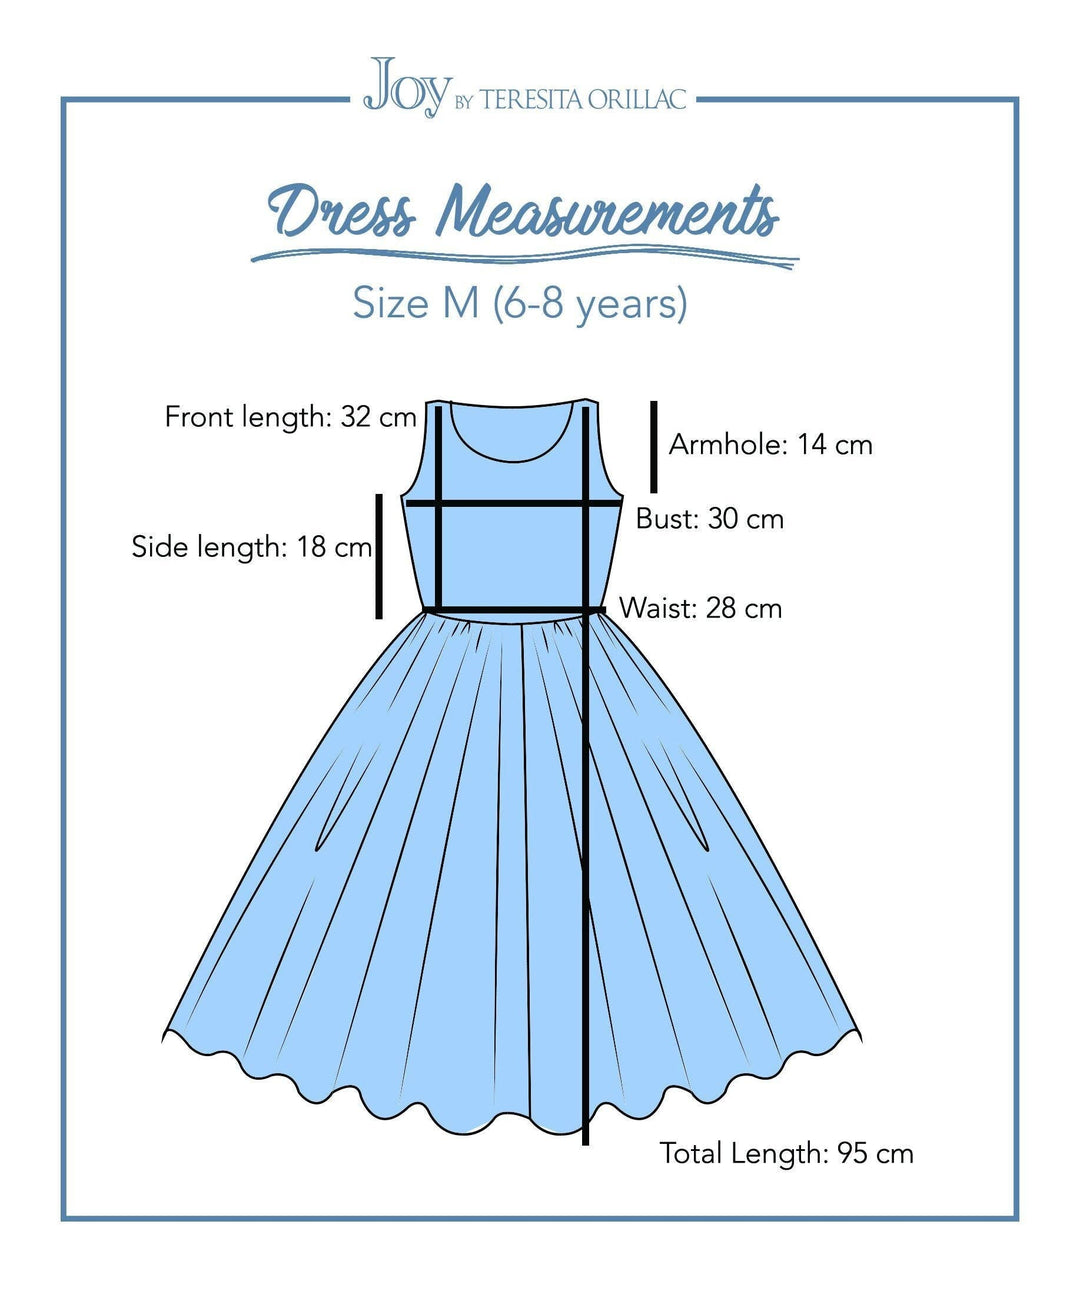 The Winter Princess-to-Queen Costume Dress